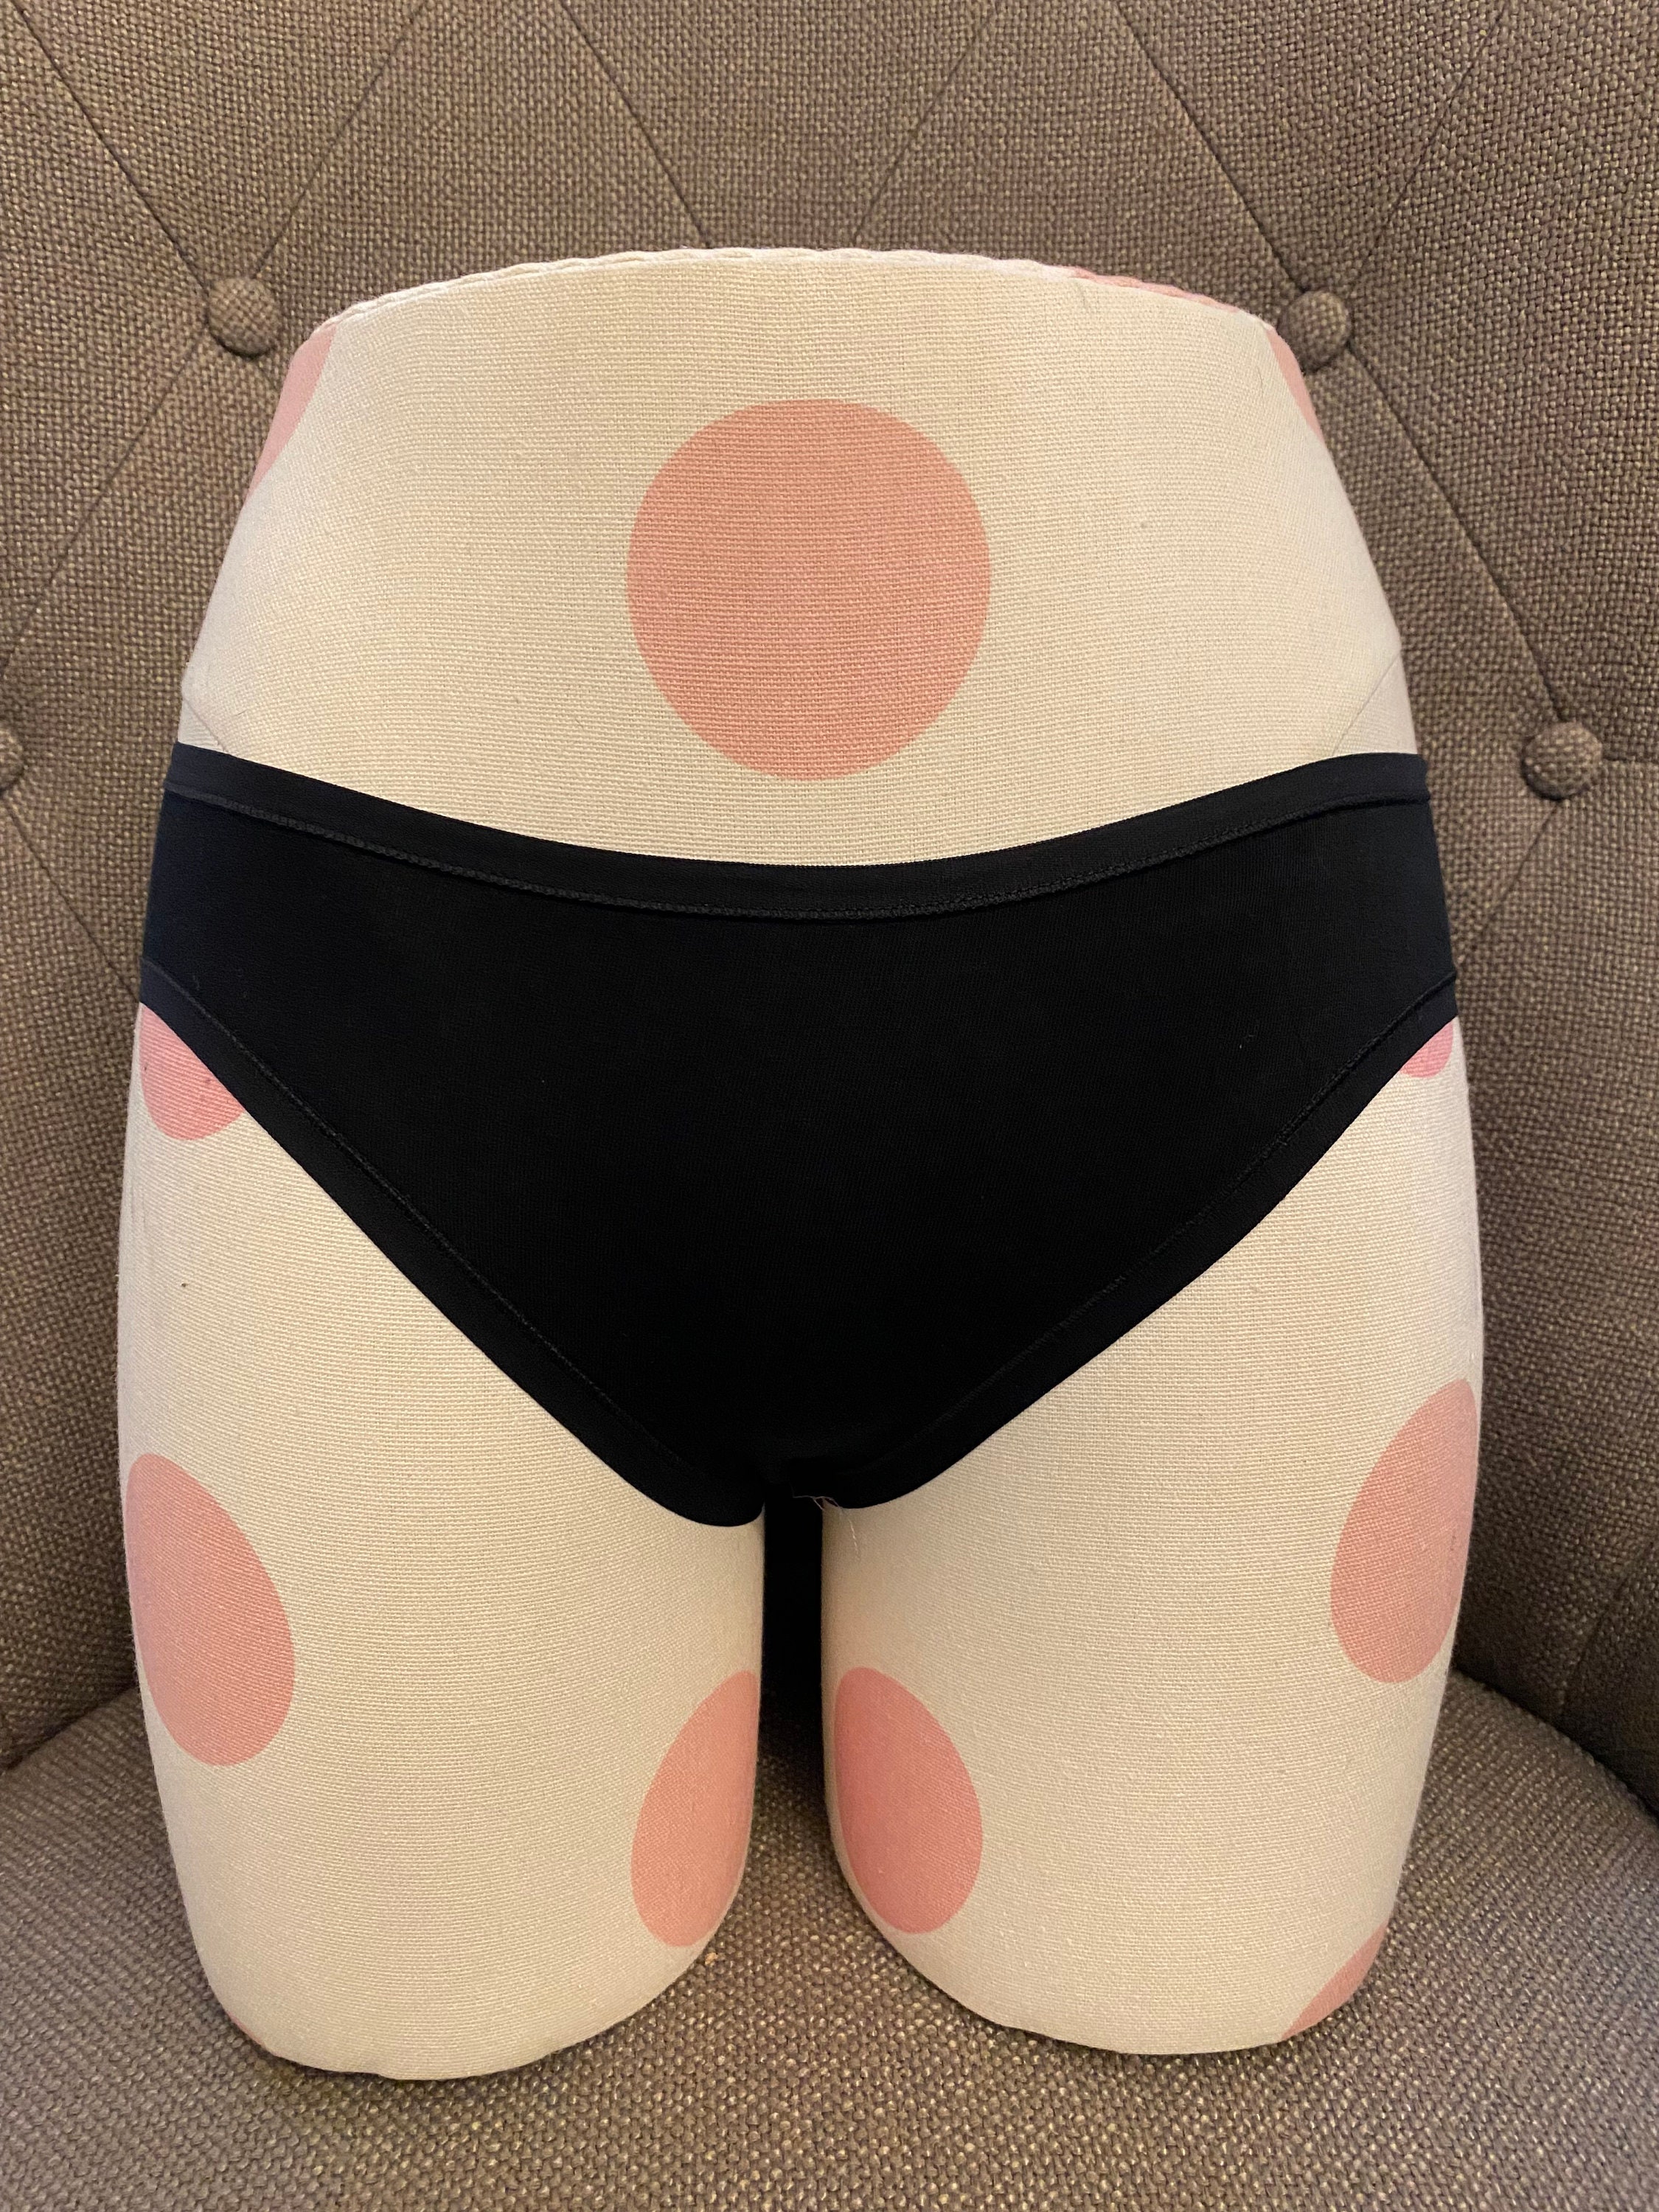 It's A Big Girl Panty Kind of Day Women's Underwear, free Shipping 35.00  see Shop for More Designs,encouragement Gift for Friends, Funny 